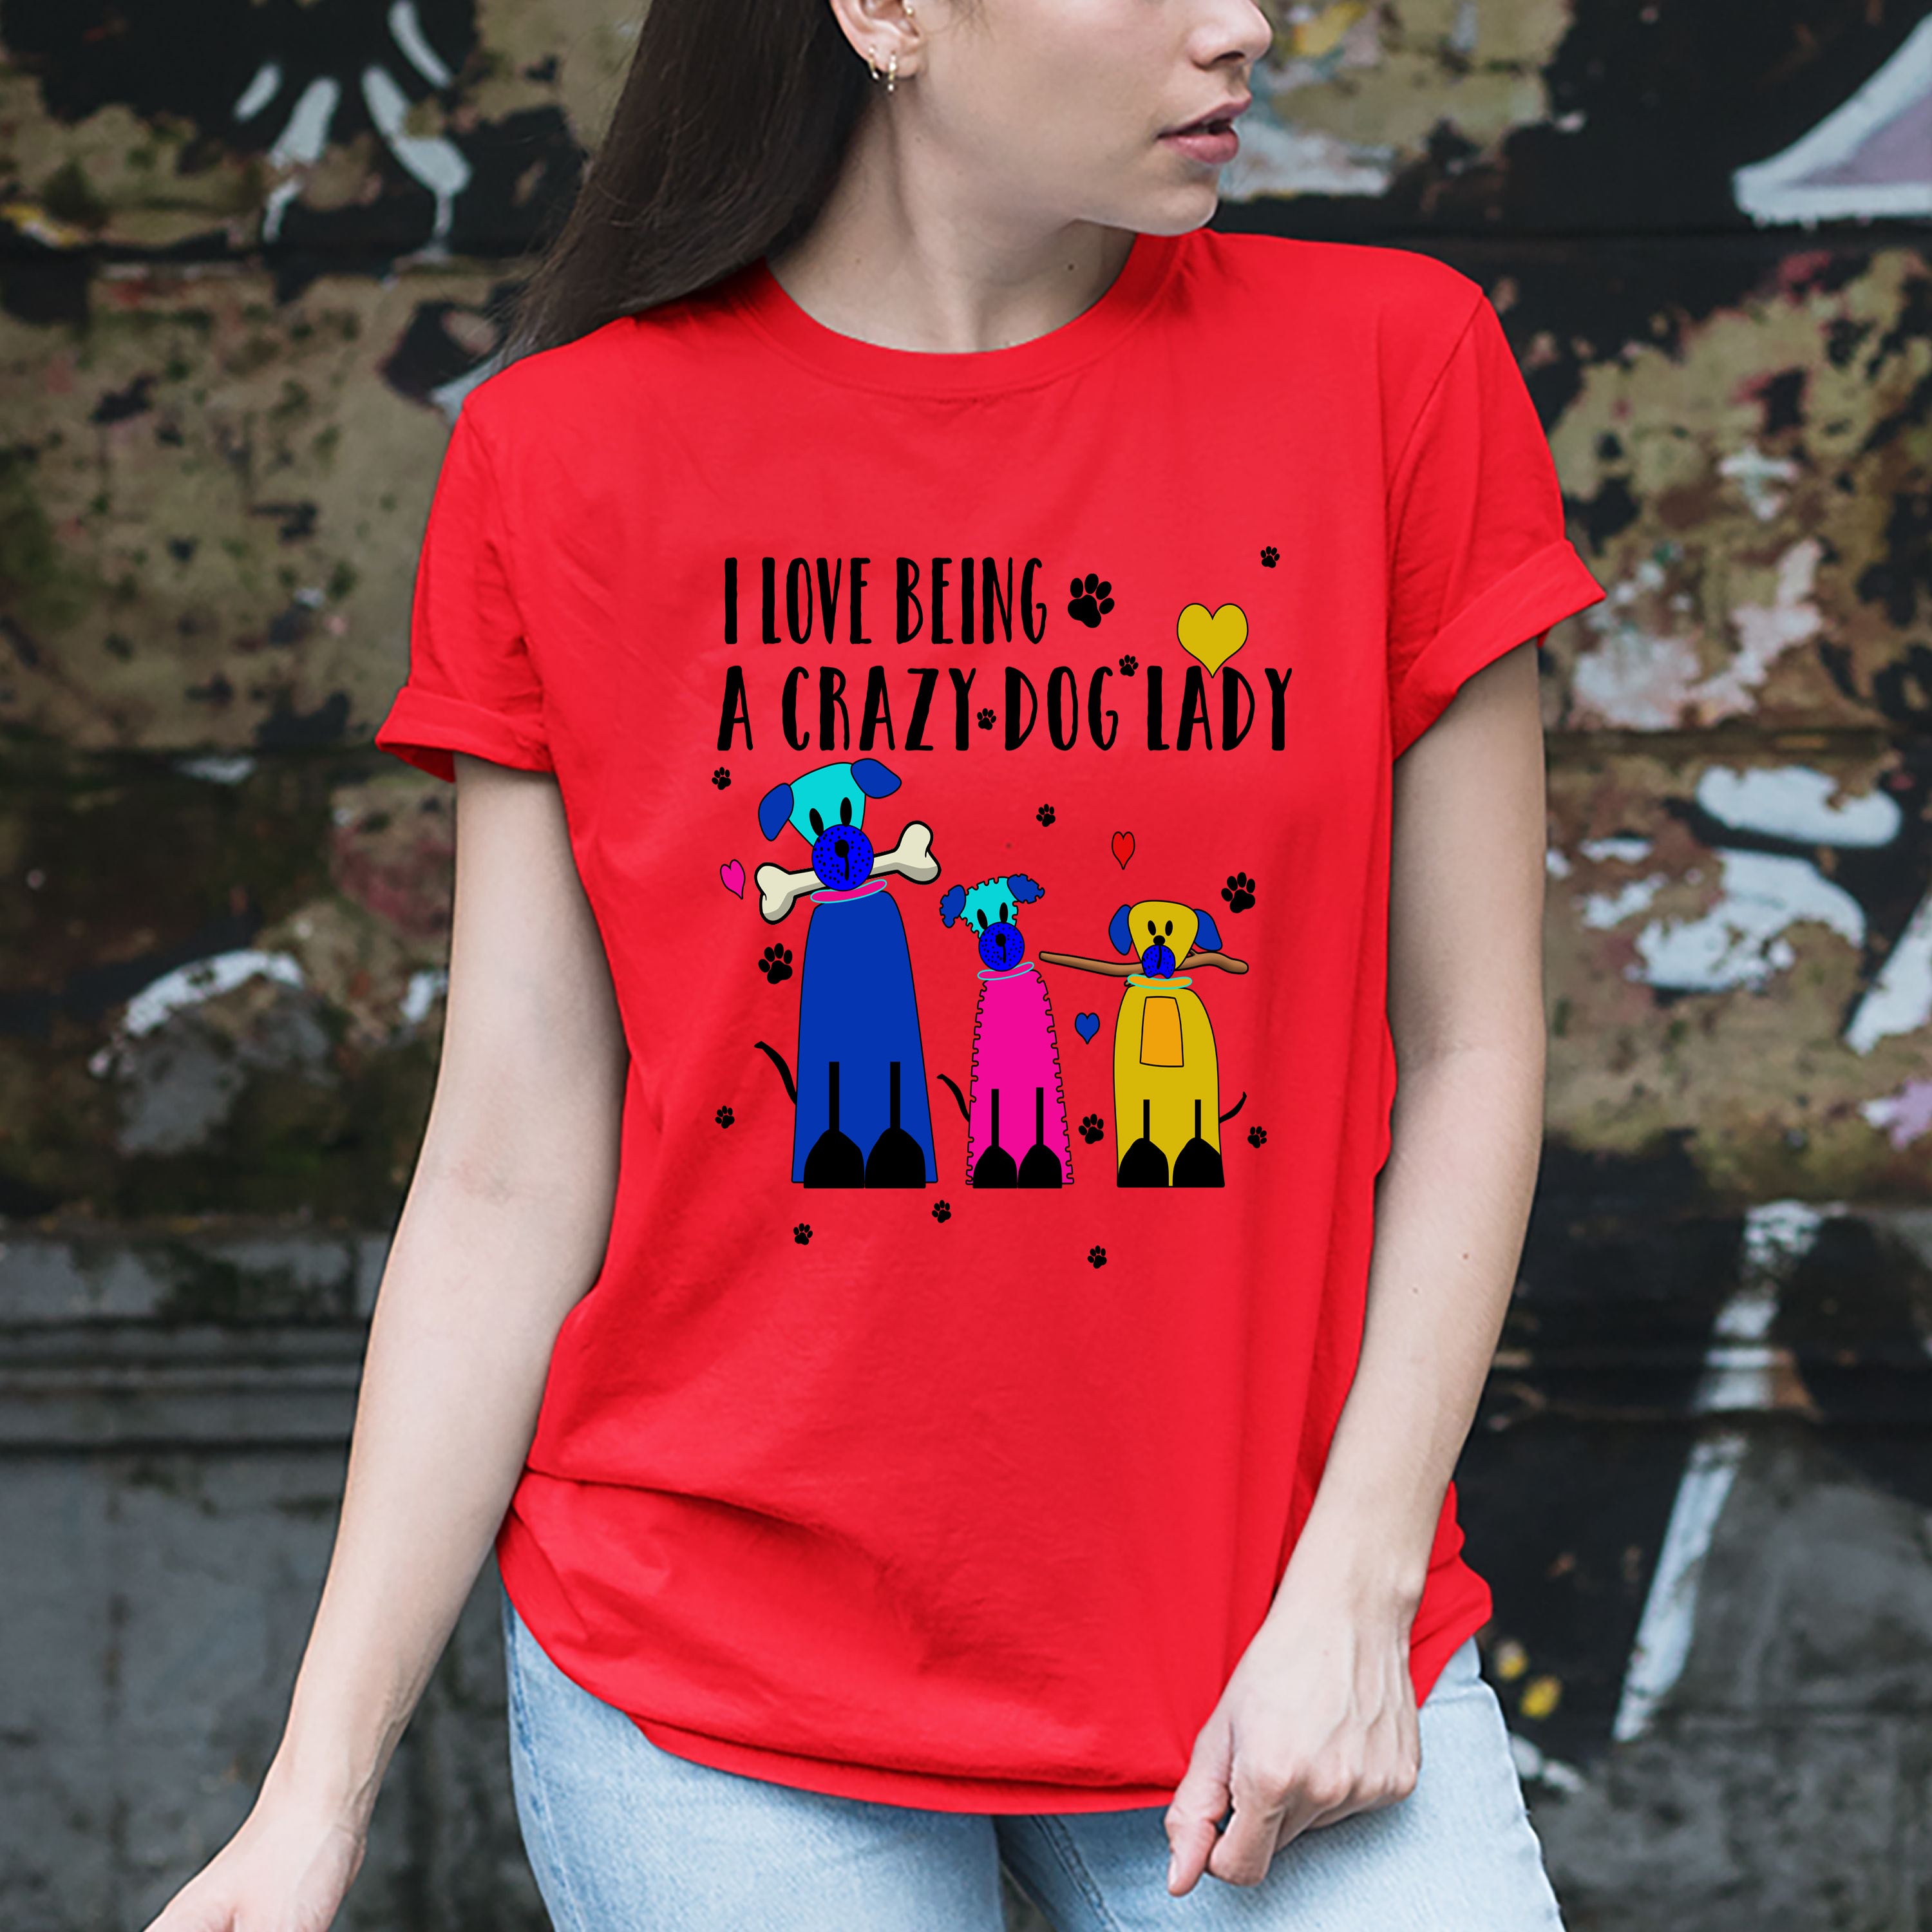 "I LOVE BEING A CRAZY DOG LADY" T-SHIRT